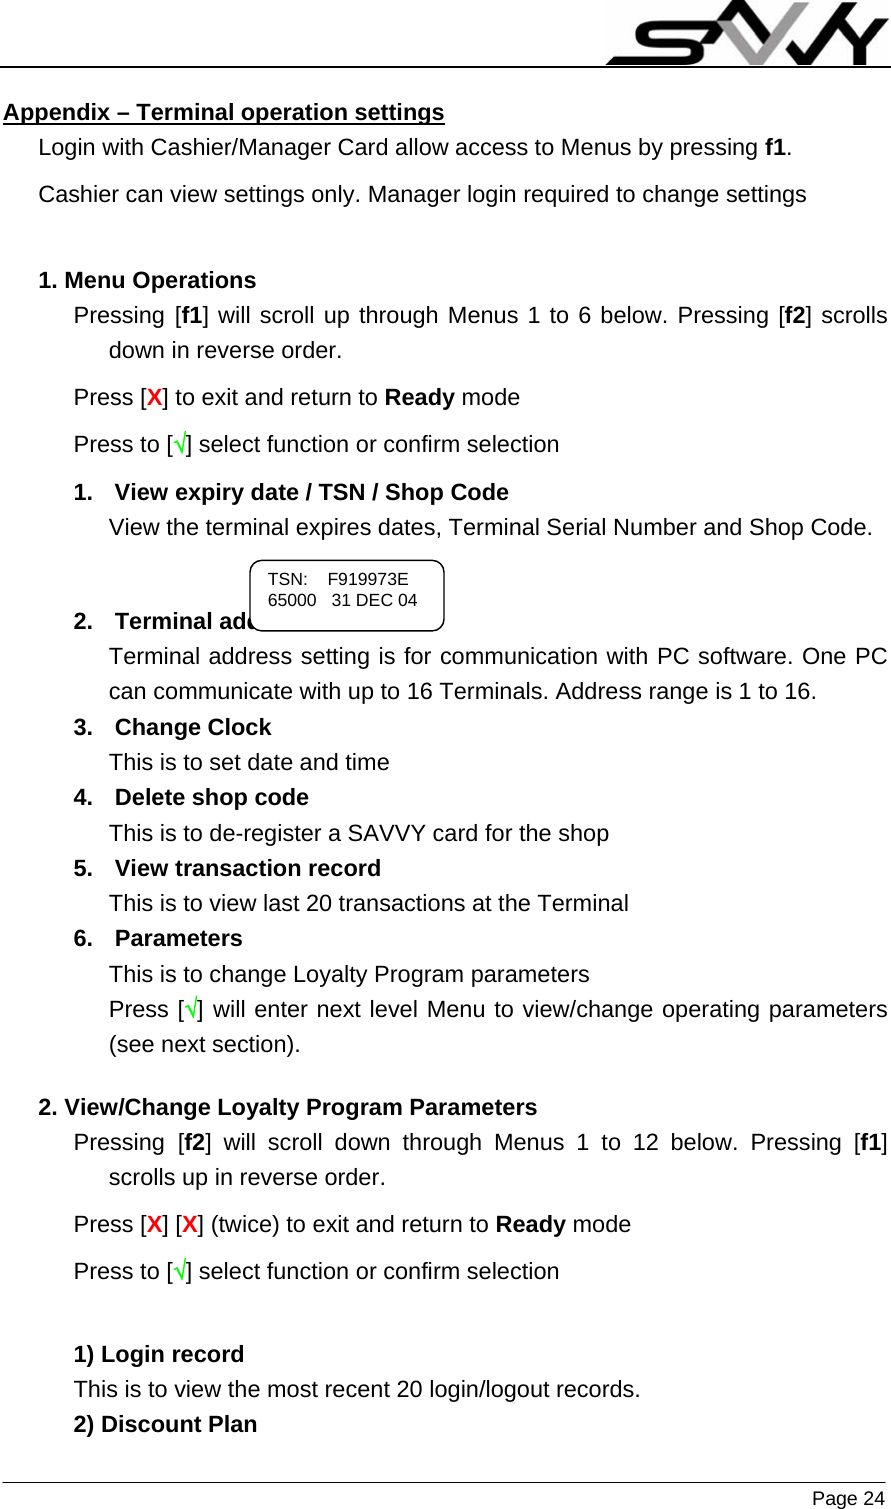                    Page 24   Appendix – Terminal operation settings  Login with Cashier/Manager Card allow access to Menus by pressing f1. Cashier can view settings only. Manager login required to change settings  1. Menu Operations Pressing [f1] will scroll up through Menus 1 to 6 below. Pressing [f2] scrolls down in reverse order. Press [X] to exit and return to Ready mode Press to [√] select function or confirm selection 1.  View expiry date / TSN / Shop Code View the terminal expires dates, Terminal Serial Number and Shop Code.   2. Terminal address Terminal address setting is for communication with PC software. One PC can communicate with up to 16 Terminals. Address range is 1 to 16. 3. Change Clock This is to set date and time 4.  Delete shop code This is to de-register a SAVVY card for the shop 5.  View transaction record This is to view last 20 transactions at the Terminal 6. Parameters This is to change Loyalty Program parameters Press [√] will enter next level Menu to view/change operating parameters (see next section).  2. View/Change Loyalty Program Parameters Pressing [f2] will scroll down through Menus 1 to 12 below. Pressing [f1] scrolls up in reverse order. Press [X] [X] (twice) to exit and return to Ready mode Press to [√] select function or confirm selection  1) Login record This is to view the most recent 20 login/logout records. 2) Discount Plan TSN:    F919973E 65000   31 DEC 04 